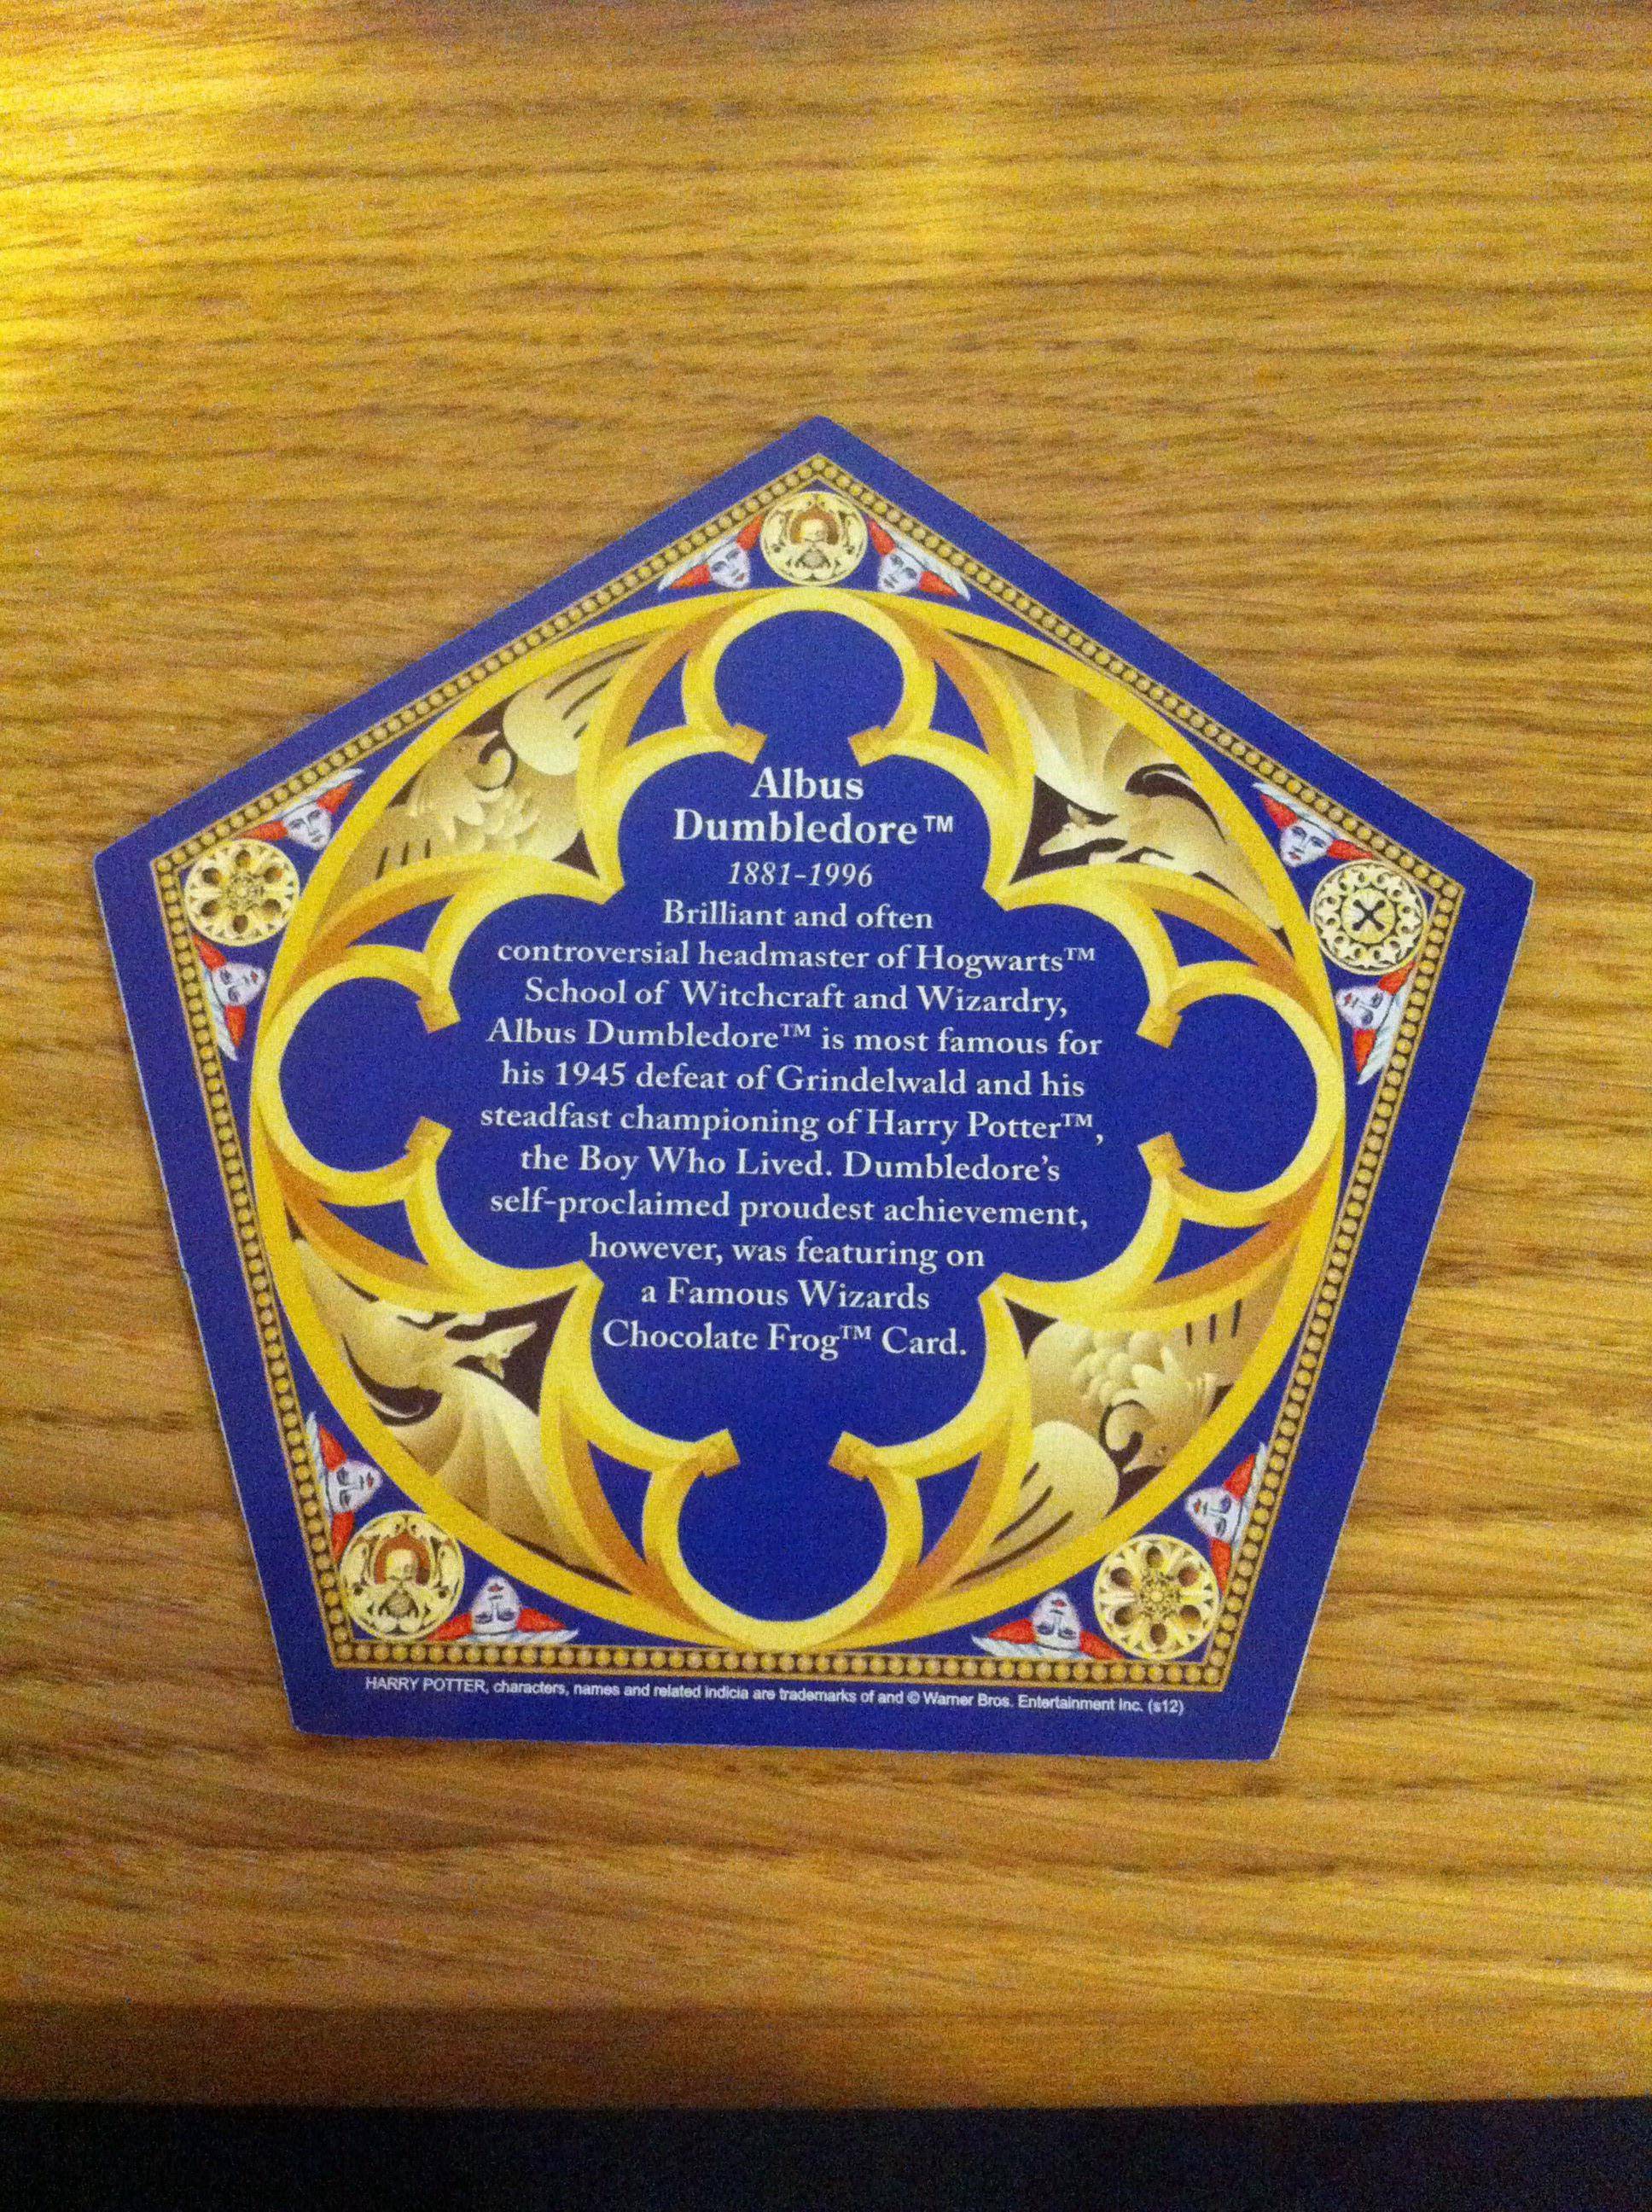 image-albus-dumbledore-chocolate-frog-card-wwhp-jpg-harry-potter